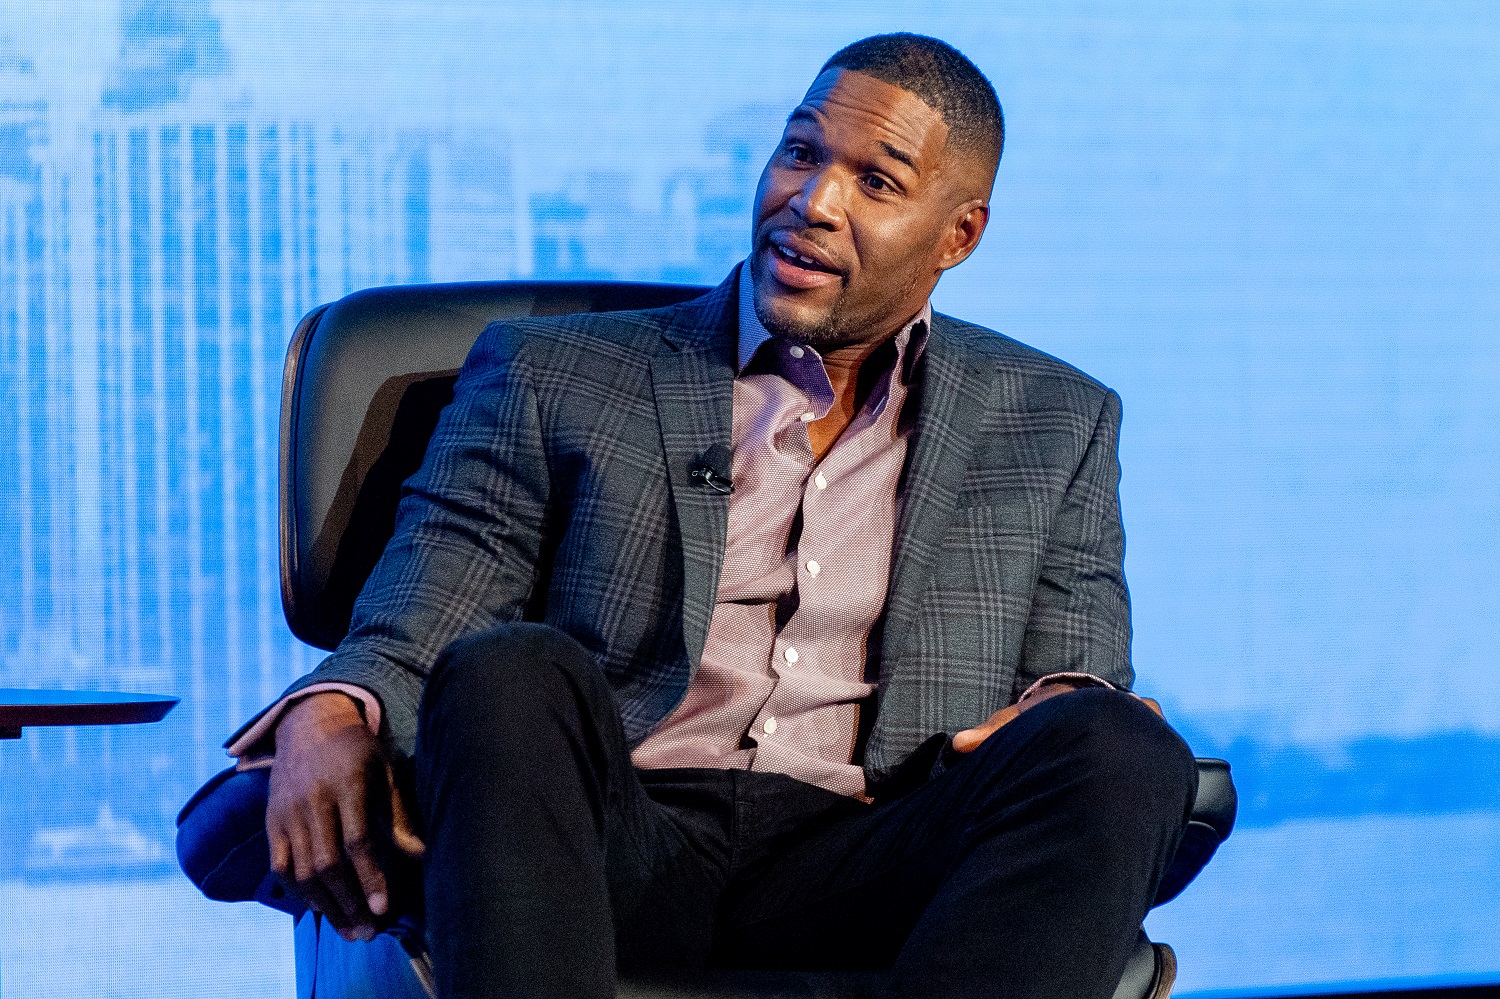 Michael Strahan on stage during the 2021 Black Entrepreneurs Day at The Apollo Theater on Oct. 6, 2021 in New York City. | Roy Rochlin/Getty Images